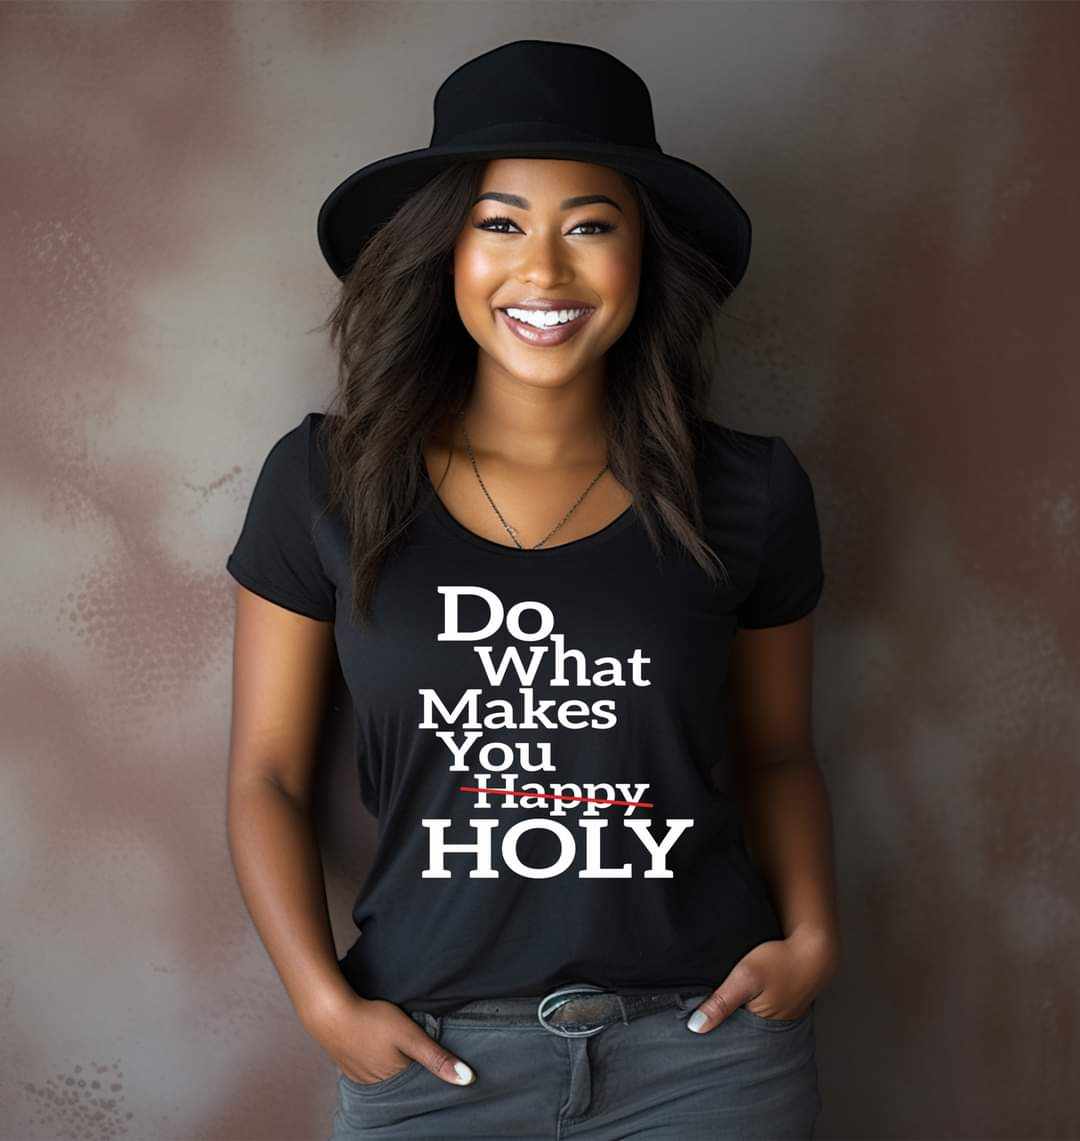 Do what makes you HOLY